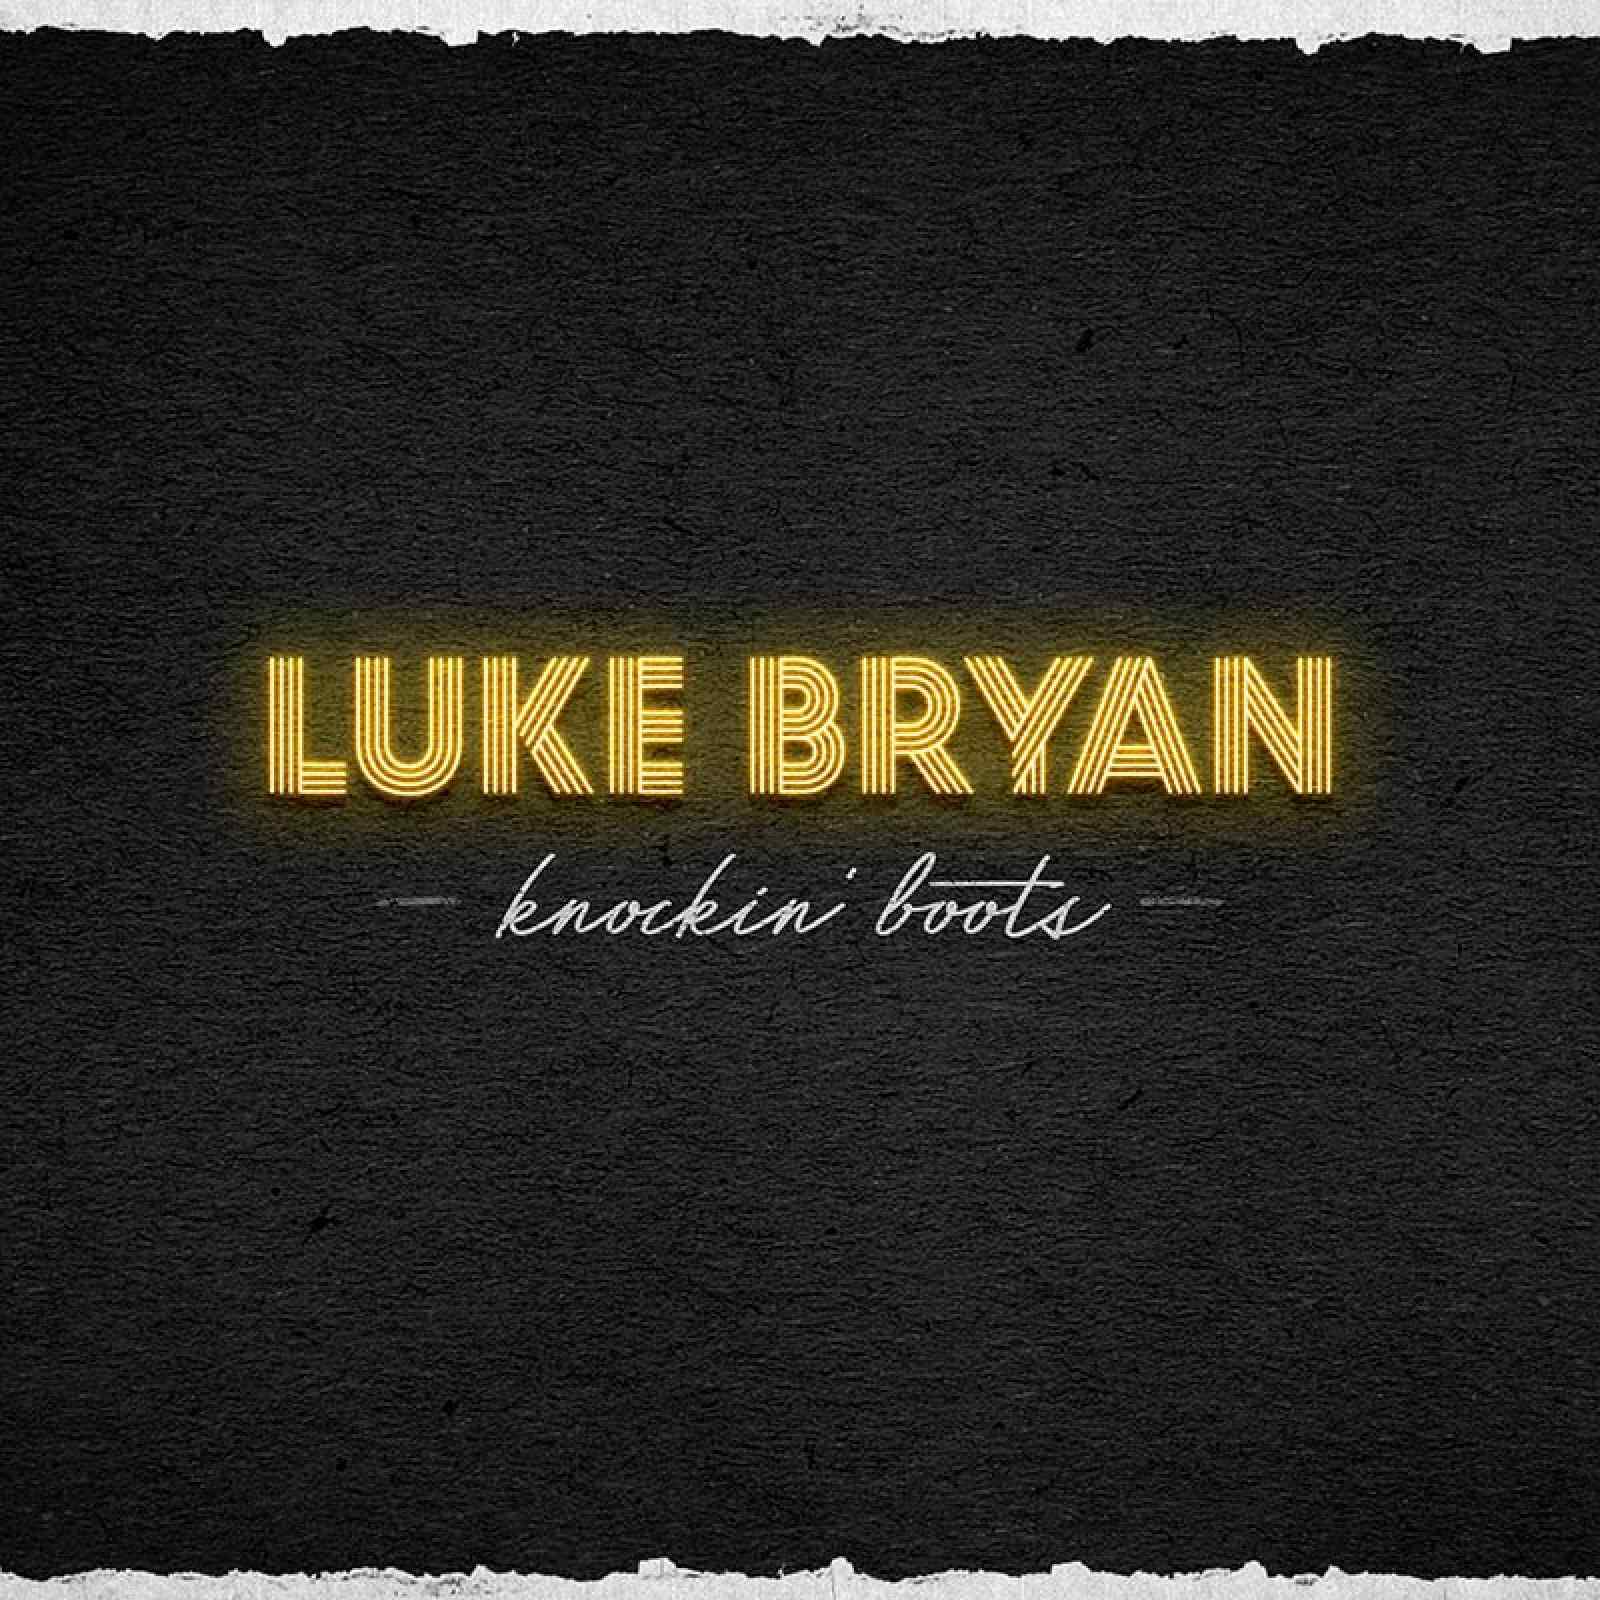 Luke to Premiere New Single "Knockin' Boots" on the 54th Academy of Country Music Awards on April 7